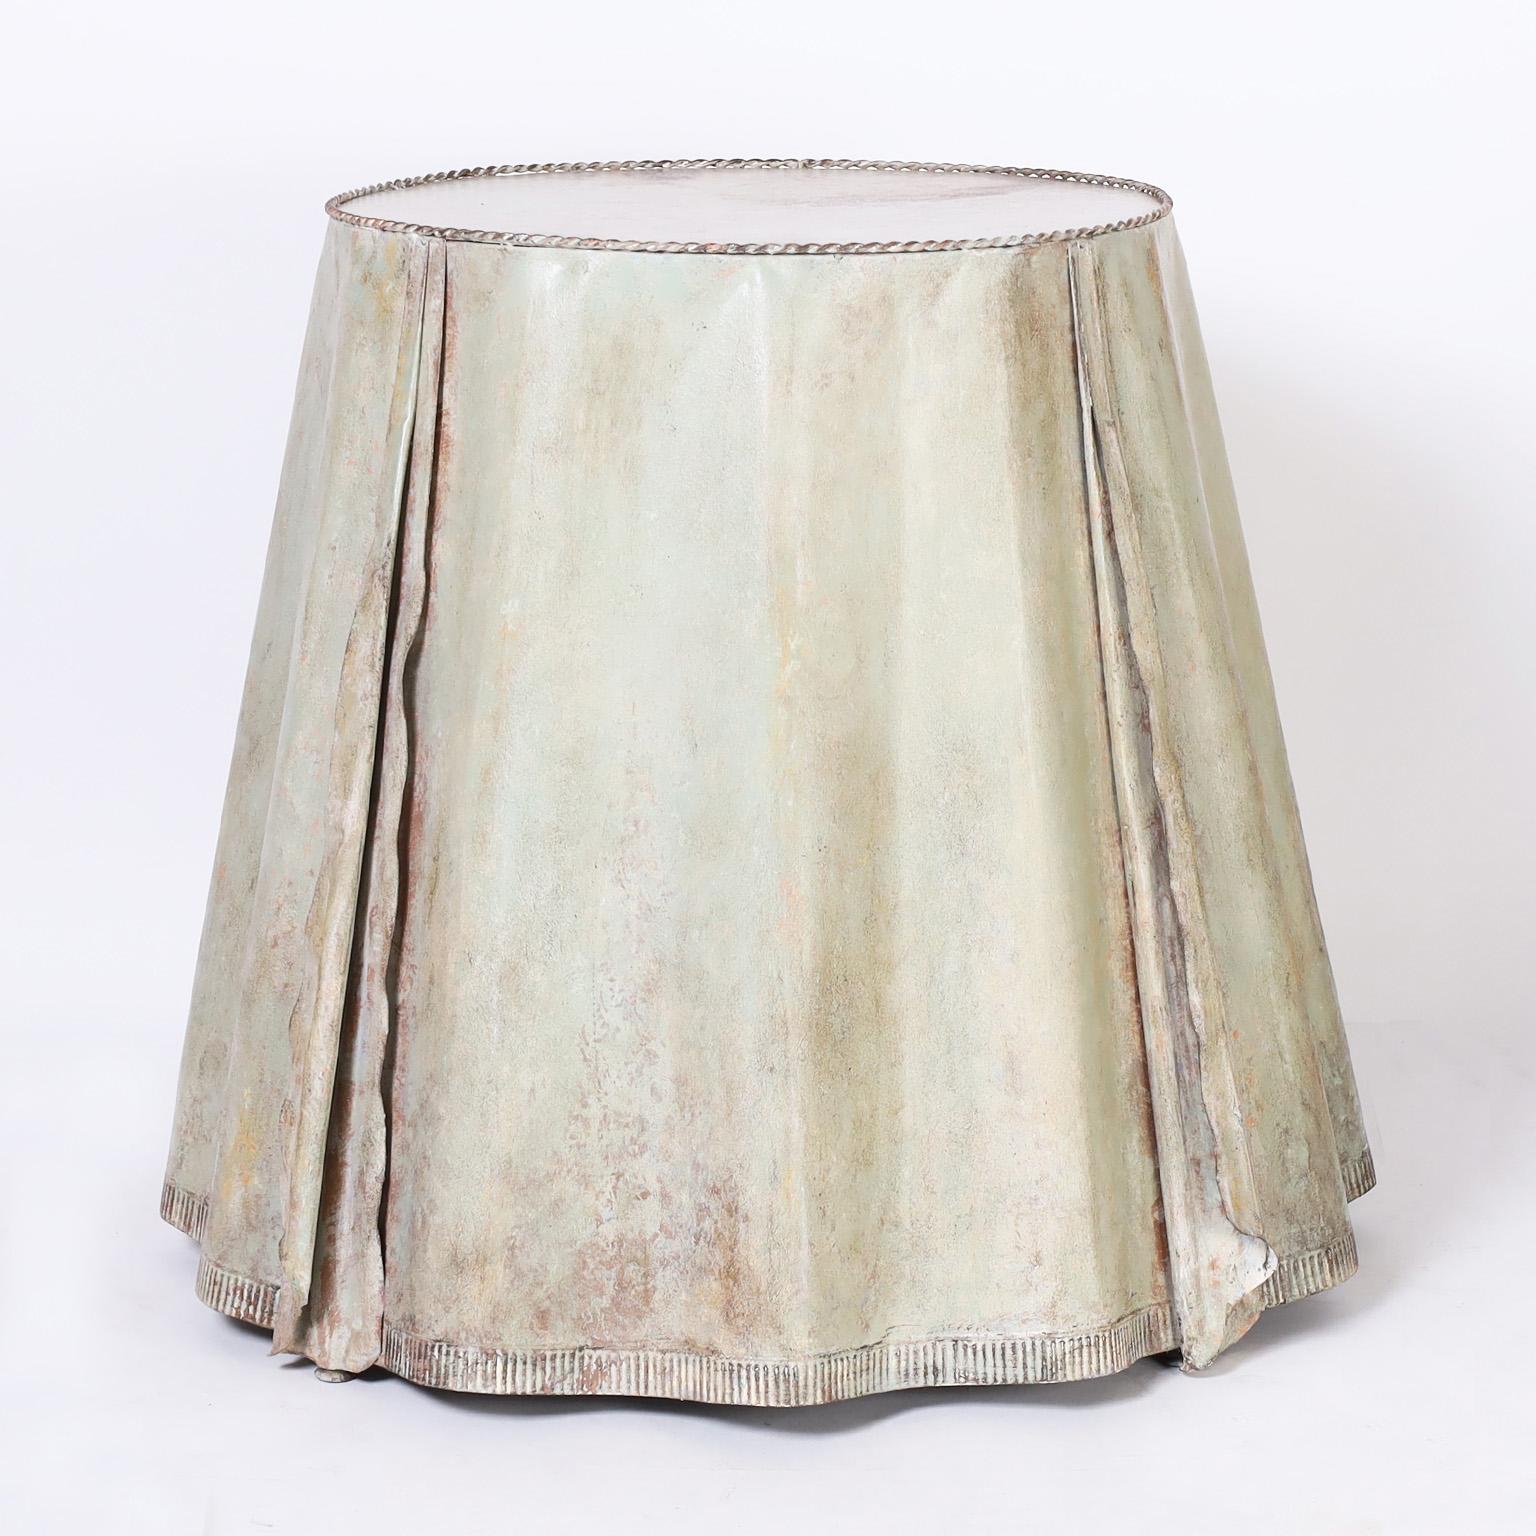 Sophisticated pair of French tables or stands crafted with metal over a sturdy metal frame in a chic industrial ghost drapery form. The original putty green finish is oxidized and worn to perfection. Best of the genre.

Top diameter is 22